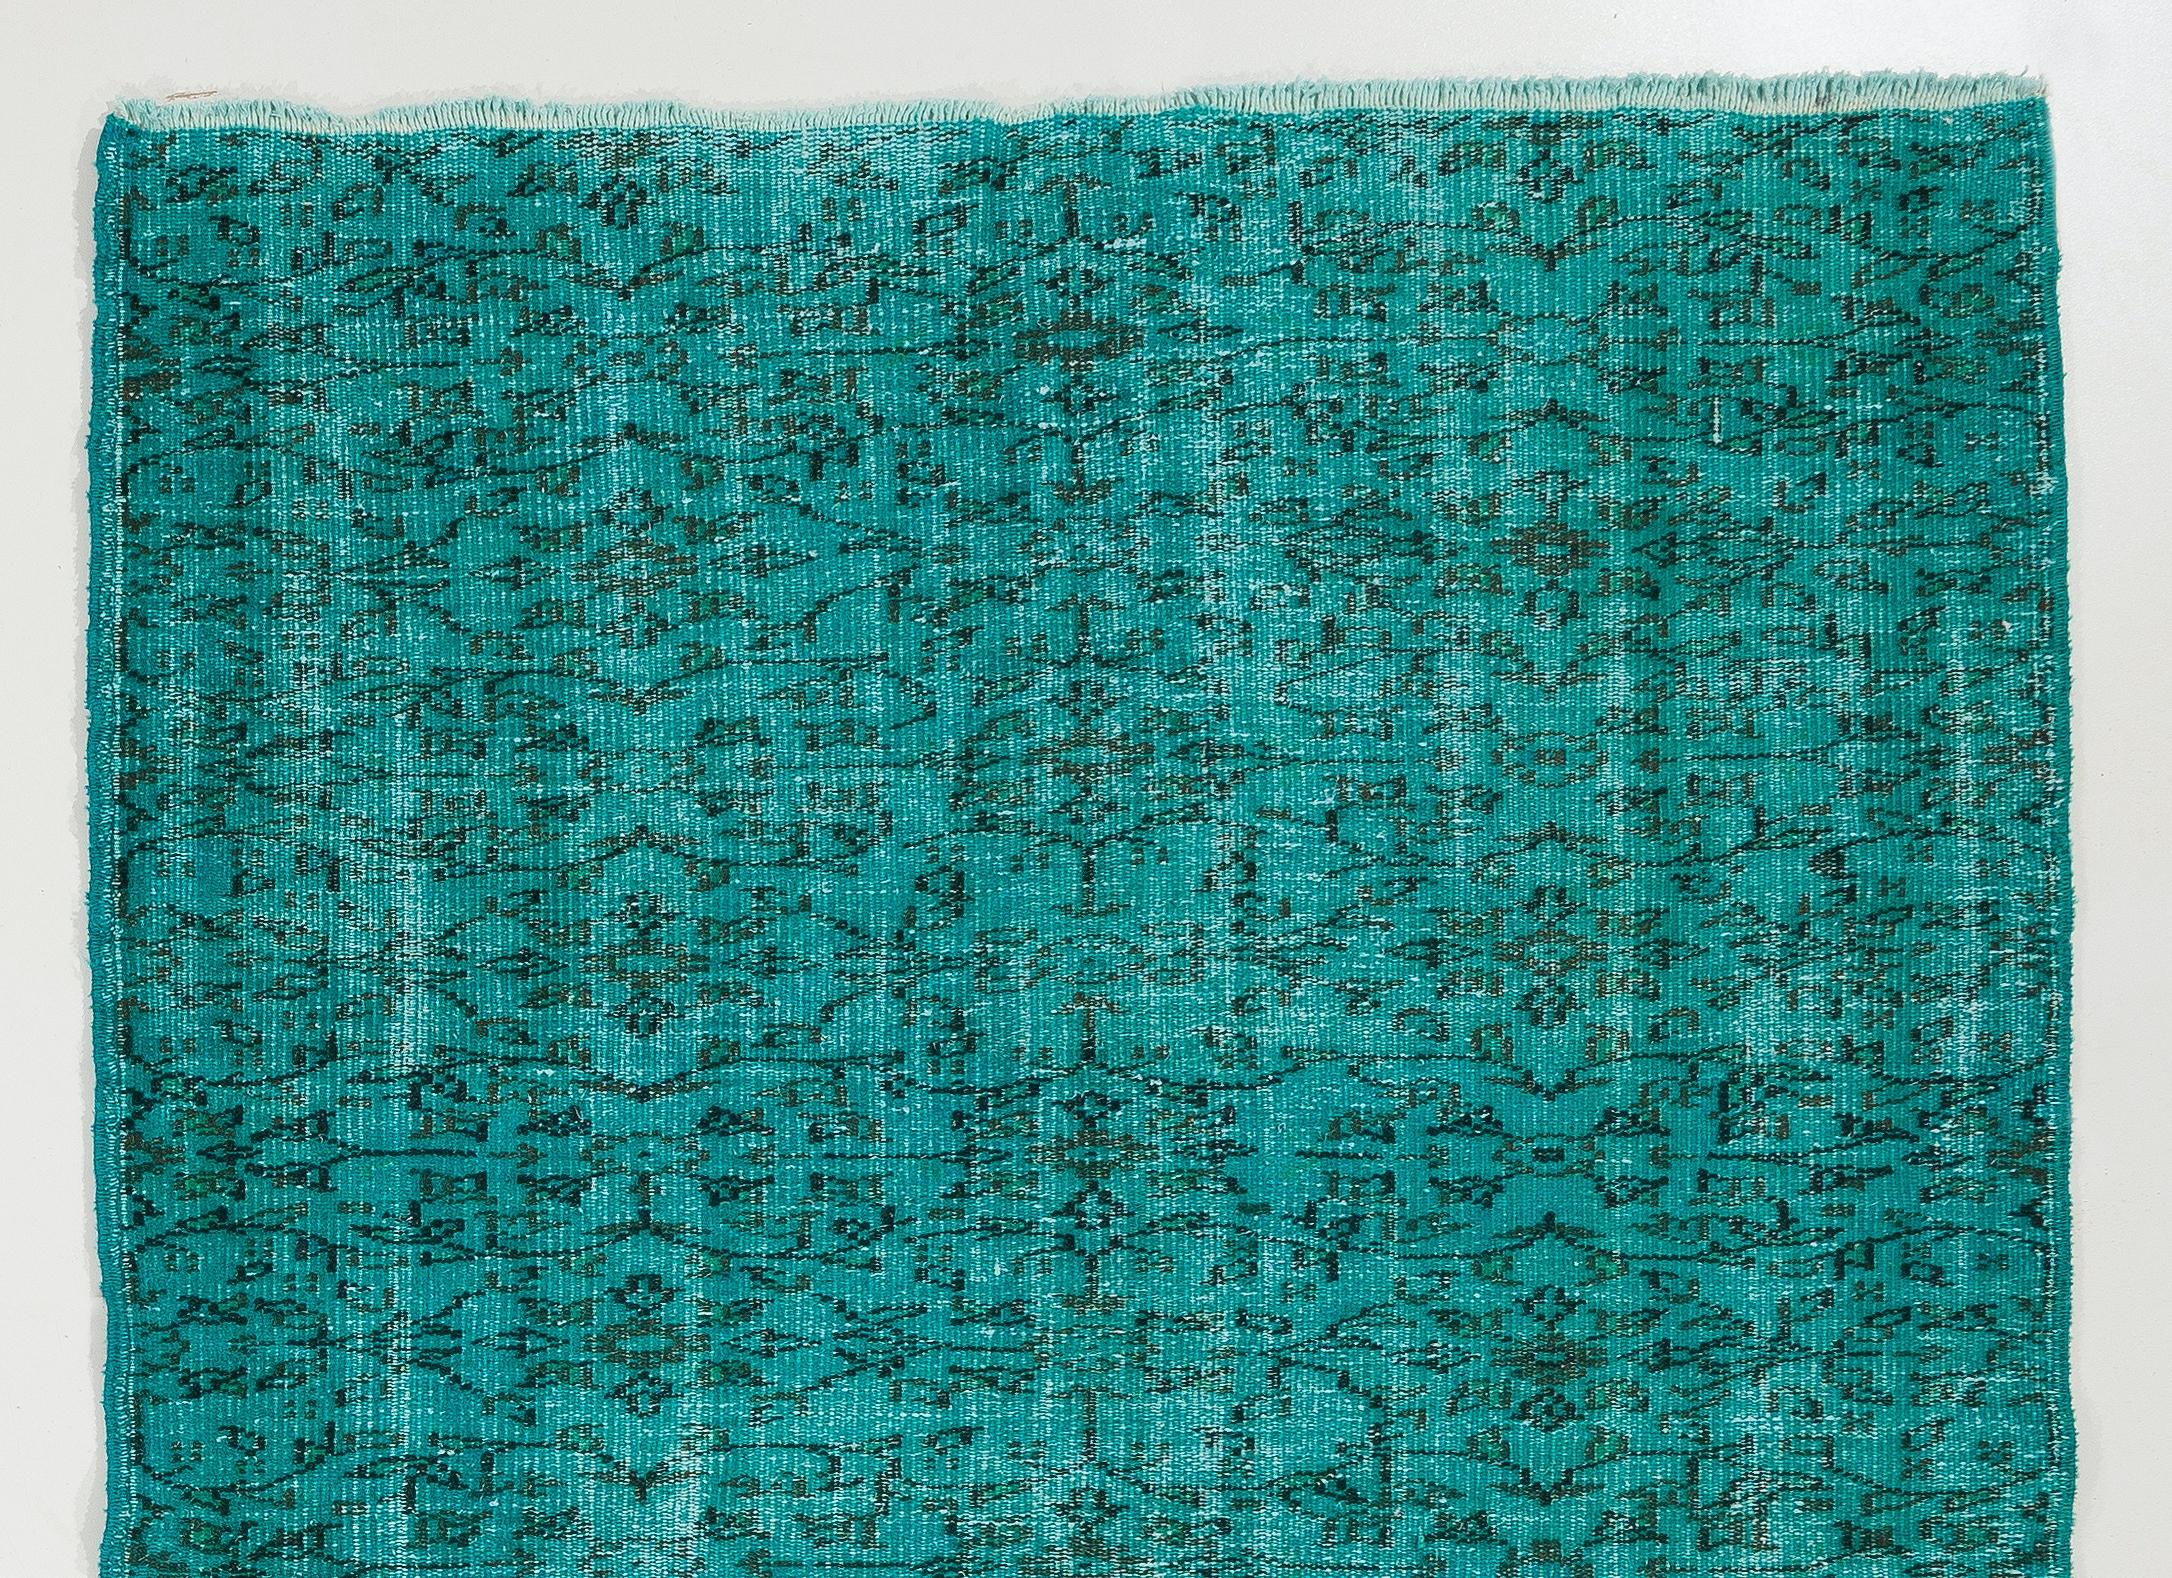 A vintage Turkish area rug over-dyed in teal color. The rug is finely hand-knotted, has low wool pile on cotton foundation. It is in very good condition, professionally washed, sturdy and suitable for areas with high foot traffic. Measures: 5 x 7.4